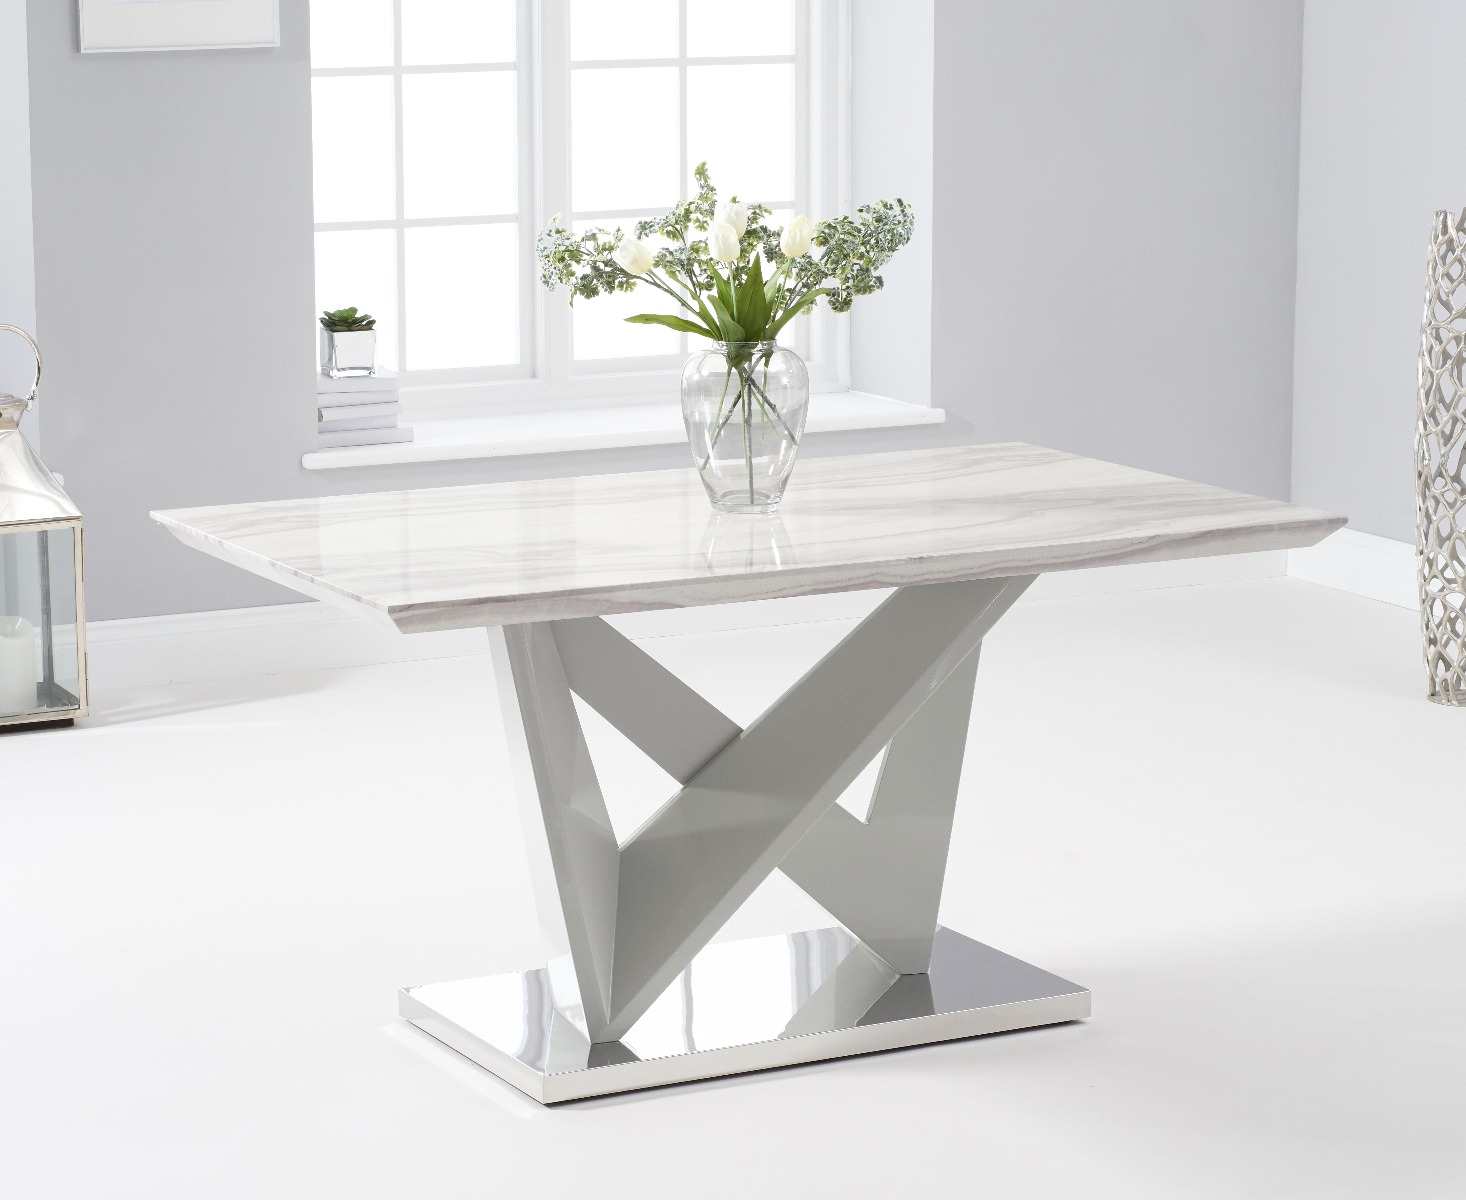 Photo 1 of Reims 150cm marble effect carrera light grey dining table with 4 grey aldo chairs